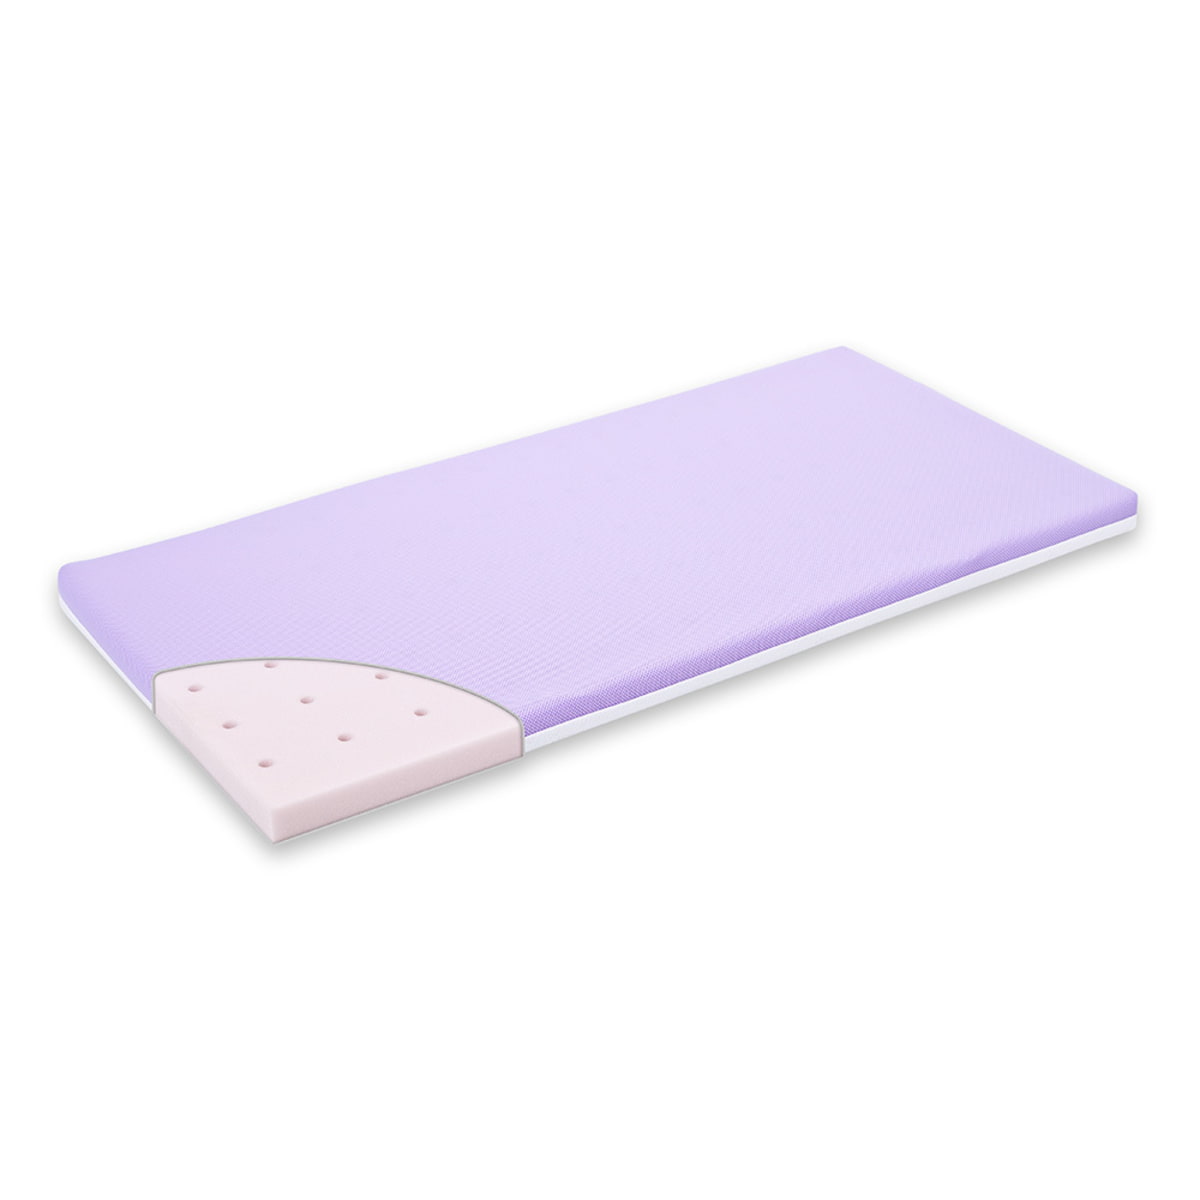 Travel bed mattress with a core out of soft foam and with 3D air-cushion-layer material in the cover